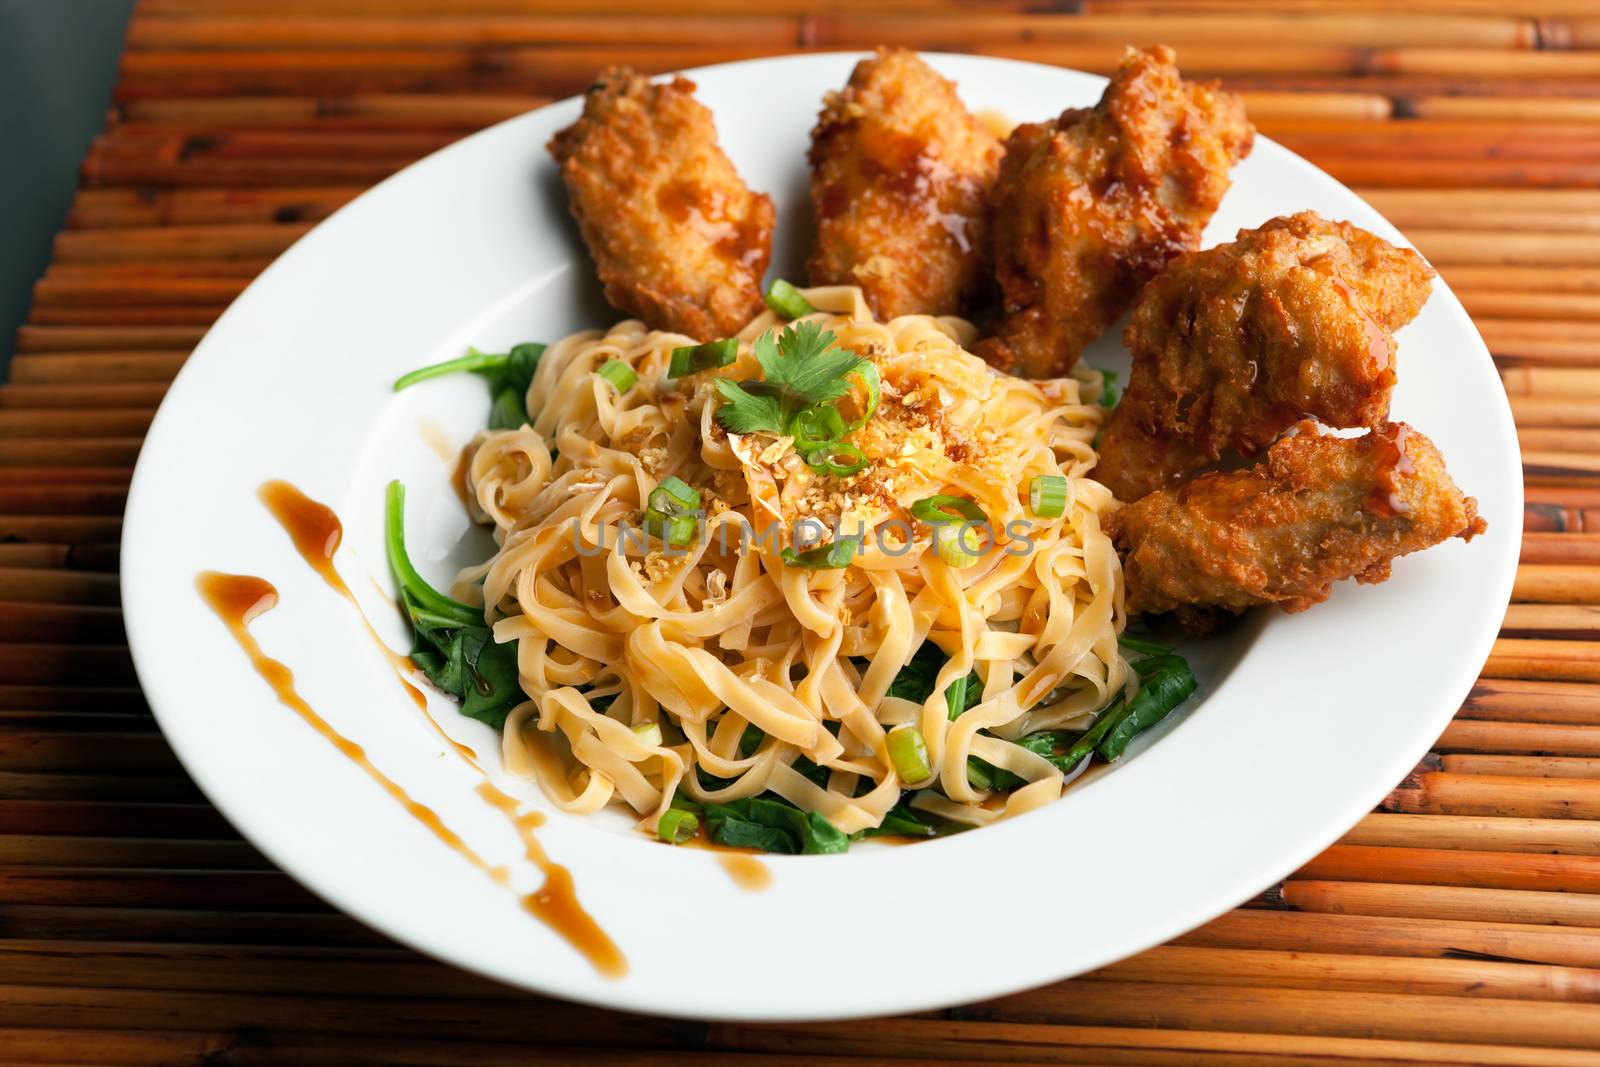 Thai style fried chicken wings on a round white plate with egg noodles and spinach.